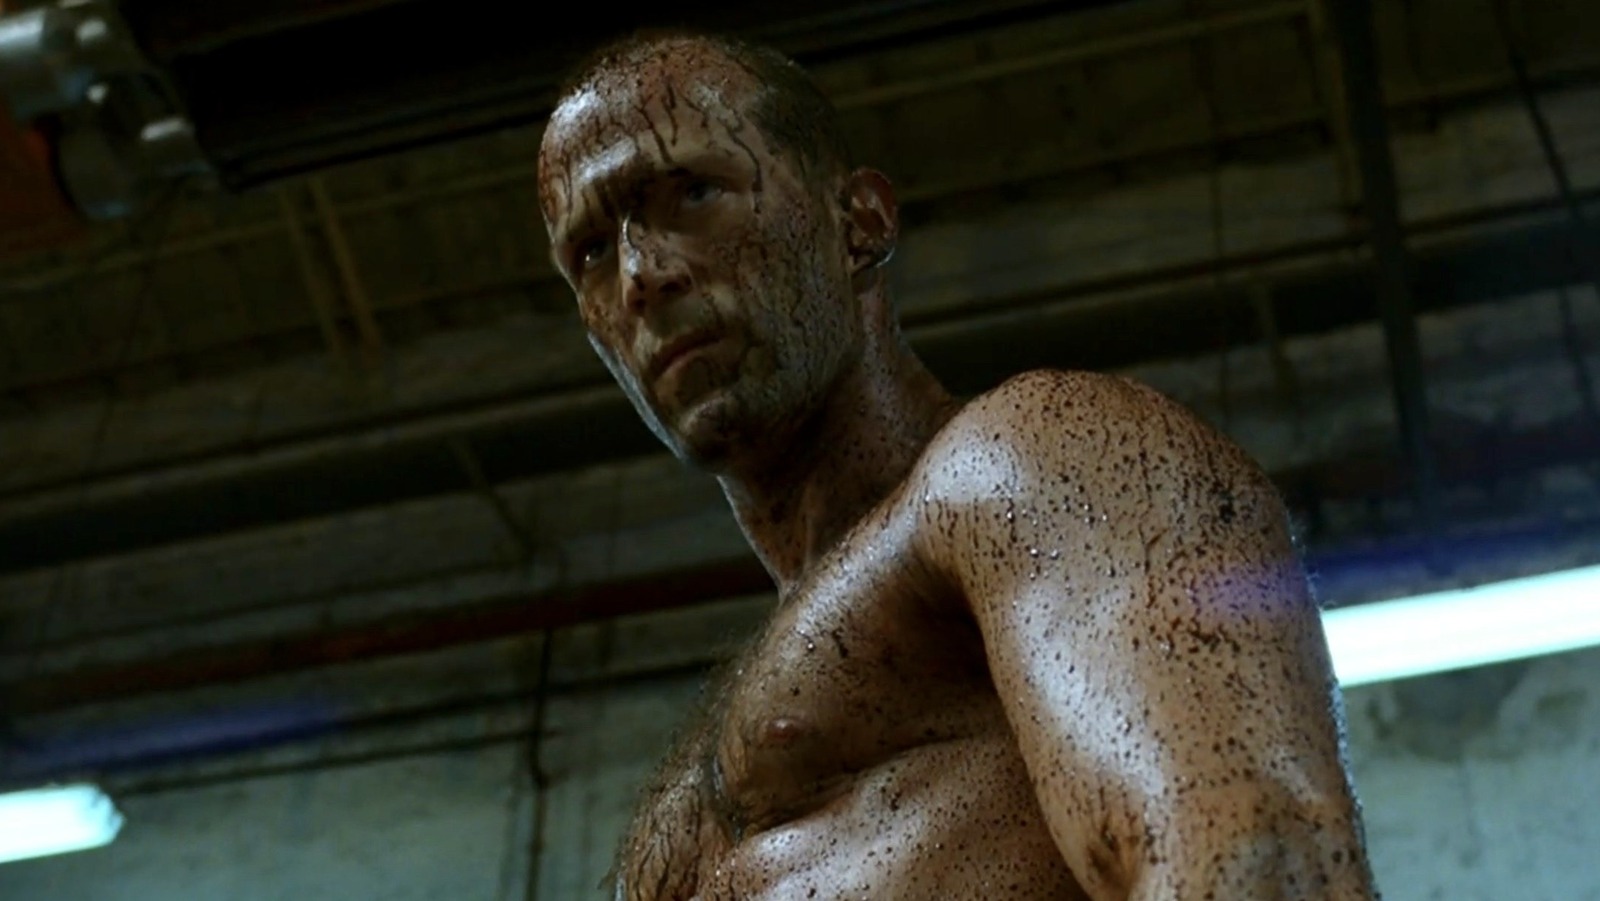 https://www.slashfilm.com/img/gallery/why-jason-statham-wouldnt-reprise-his-role-for-the-transporter-reboot/l-intro-1653922075.jpg